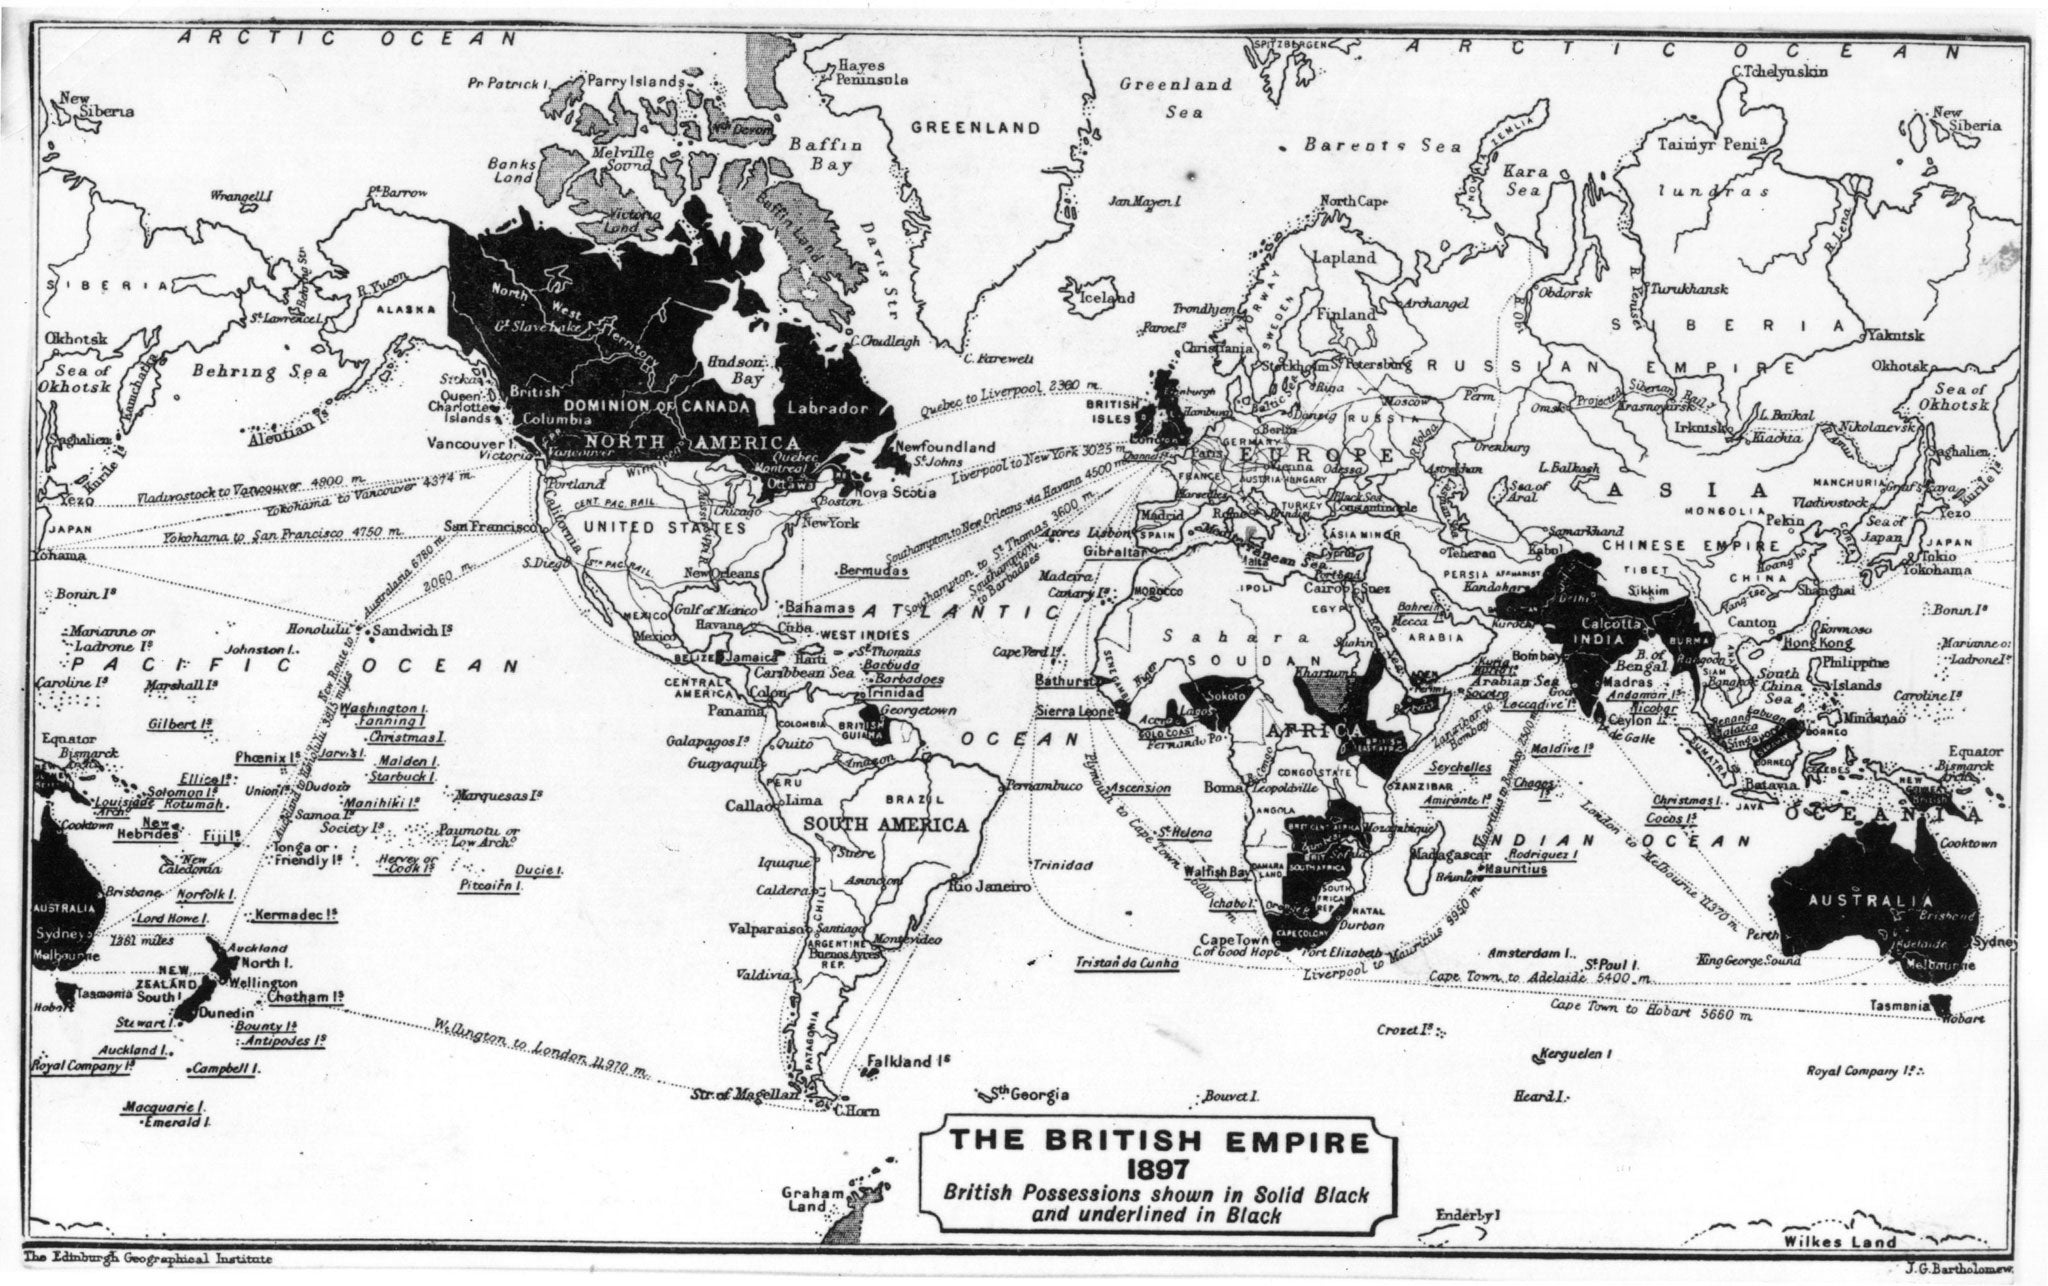 A map of the British Empire from 1897